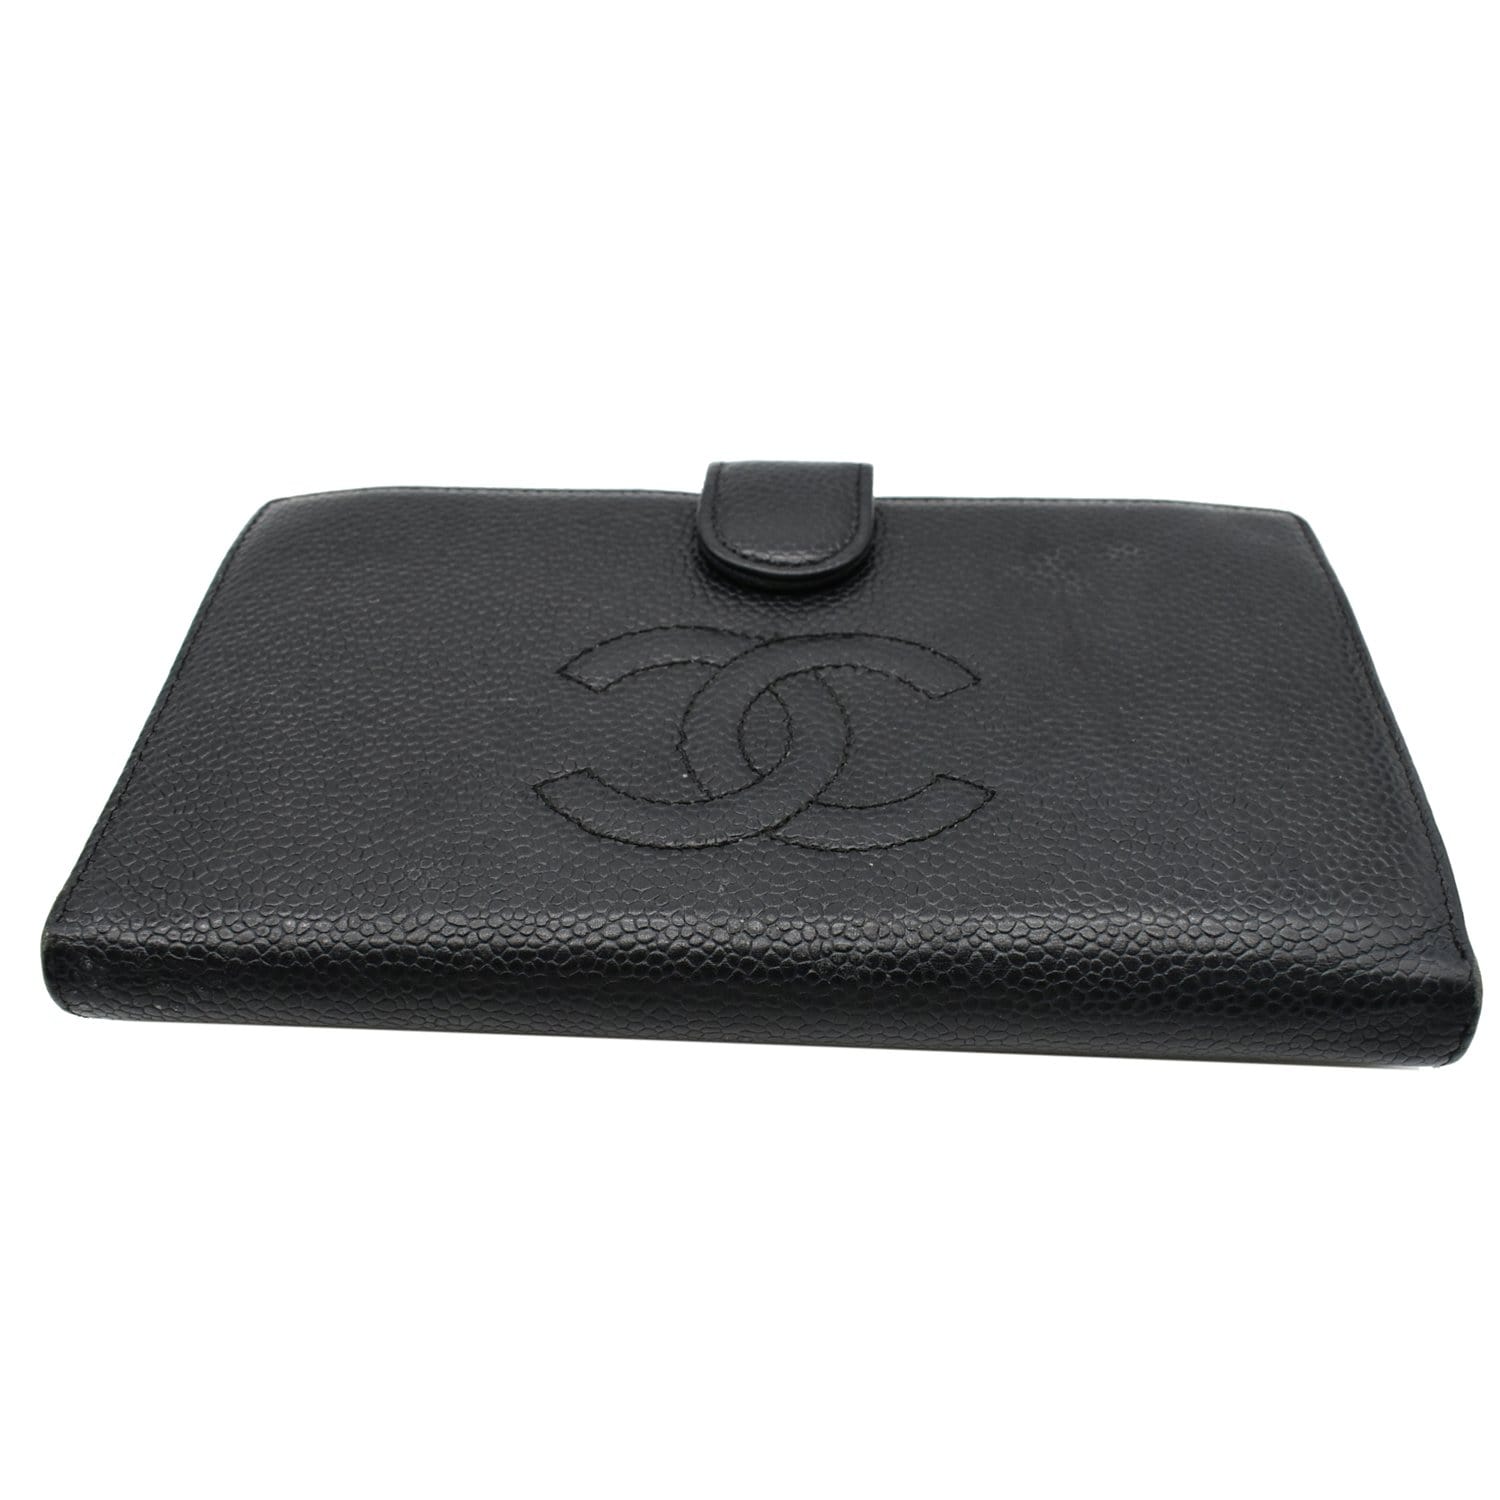 Vintage Chanel Timeless Wallet in Black Caviar Leather from France